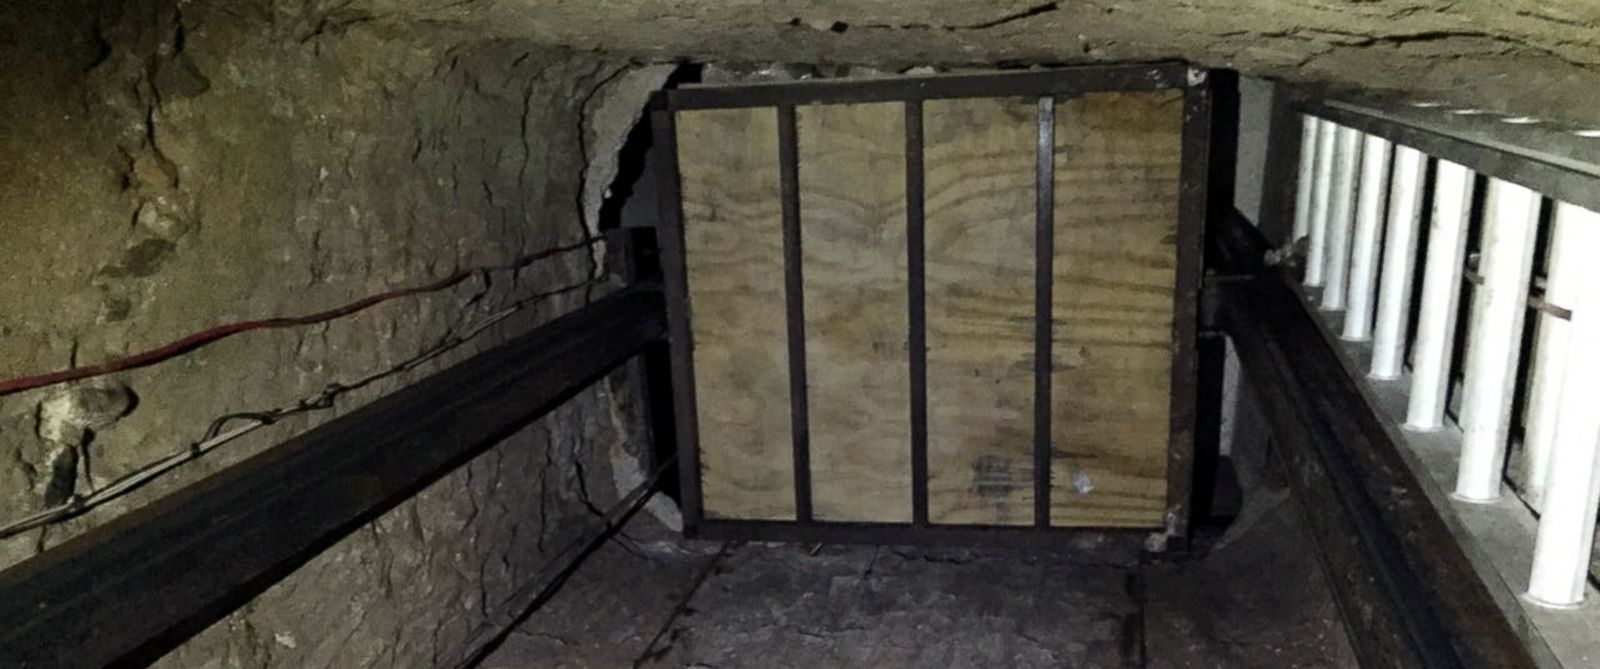 An elevator inside a tunnel stretching from Mexico to San Diego. Officials announced the discovery of the nearly half-mile-long tunnel, April 20, 2016, along with the seizure of cocaine and marijuana. 